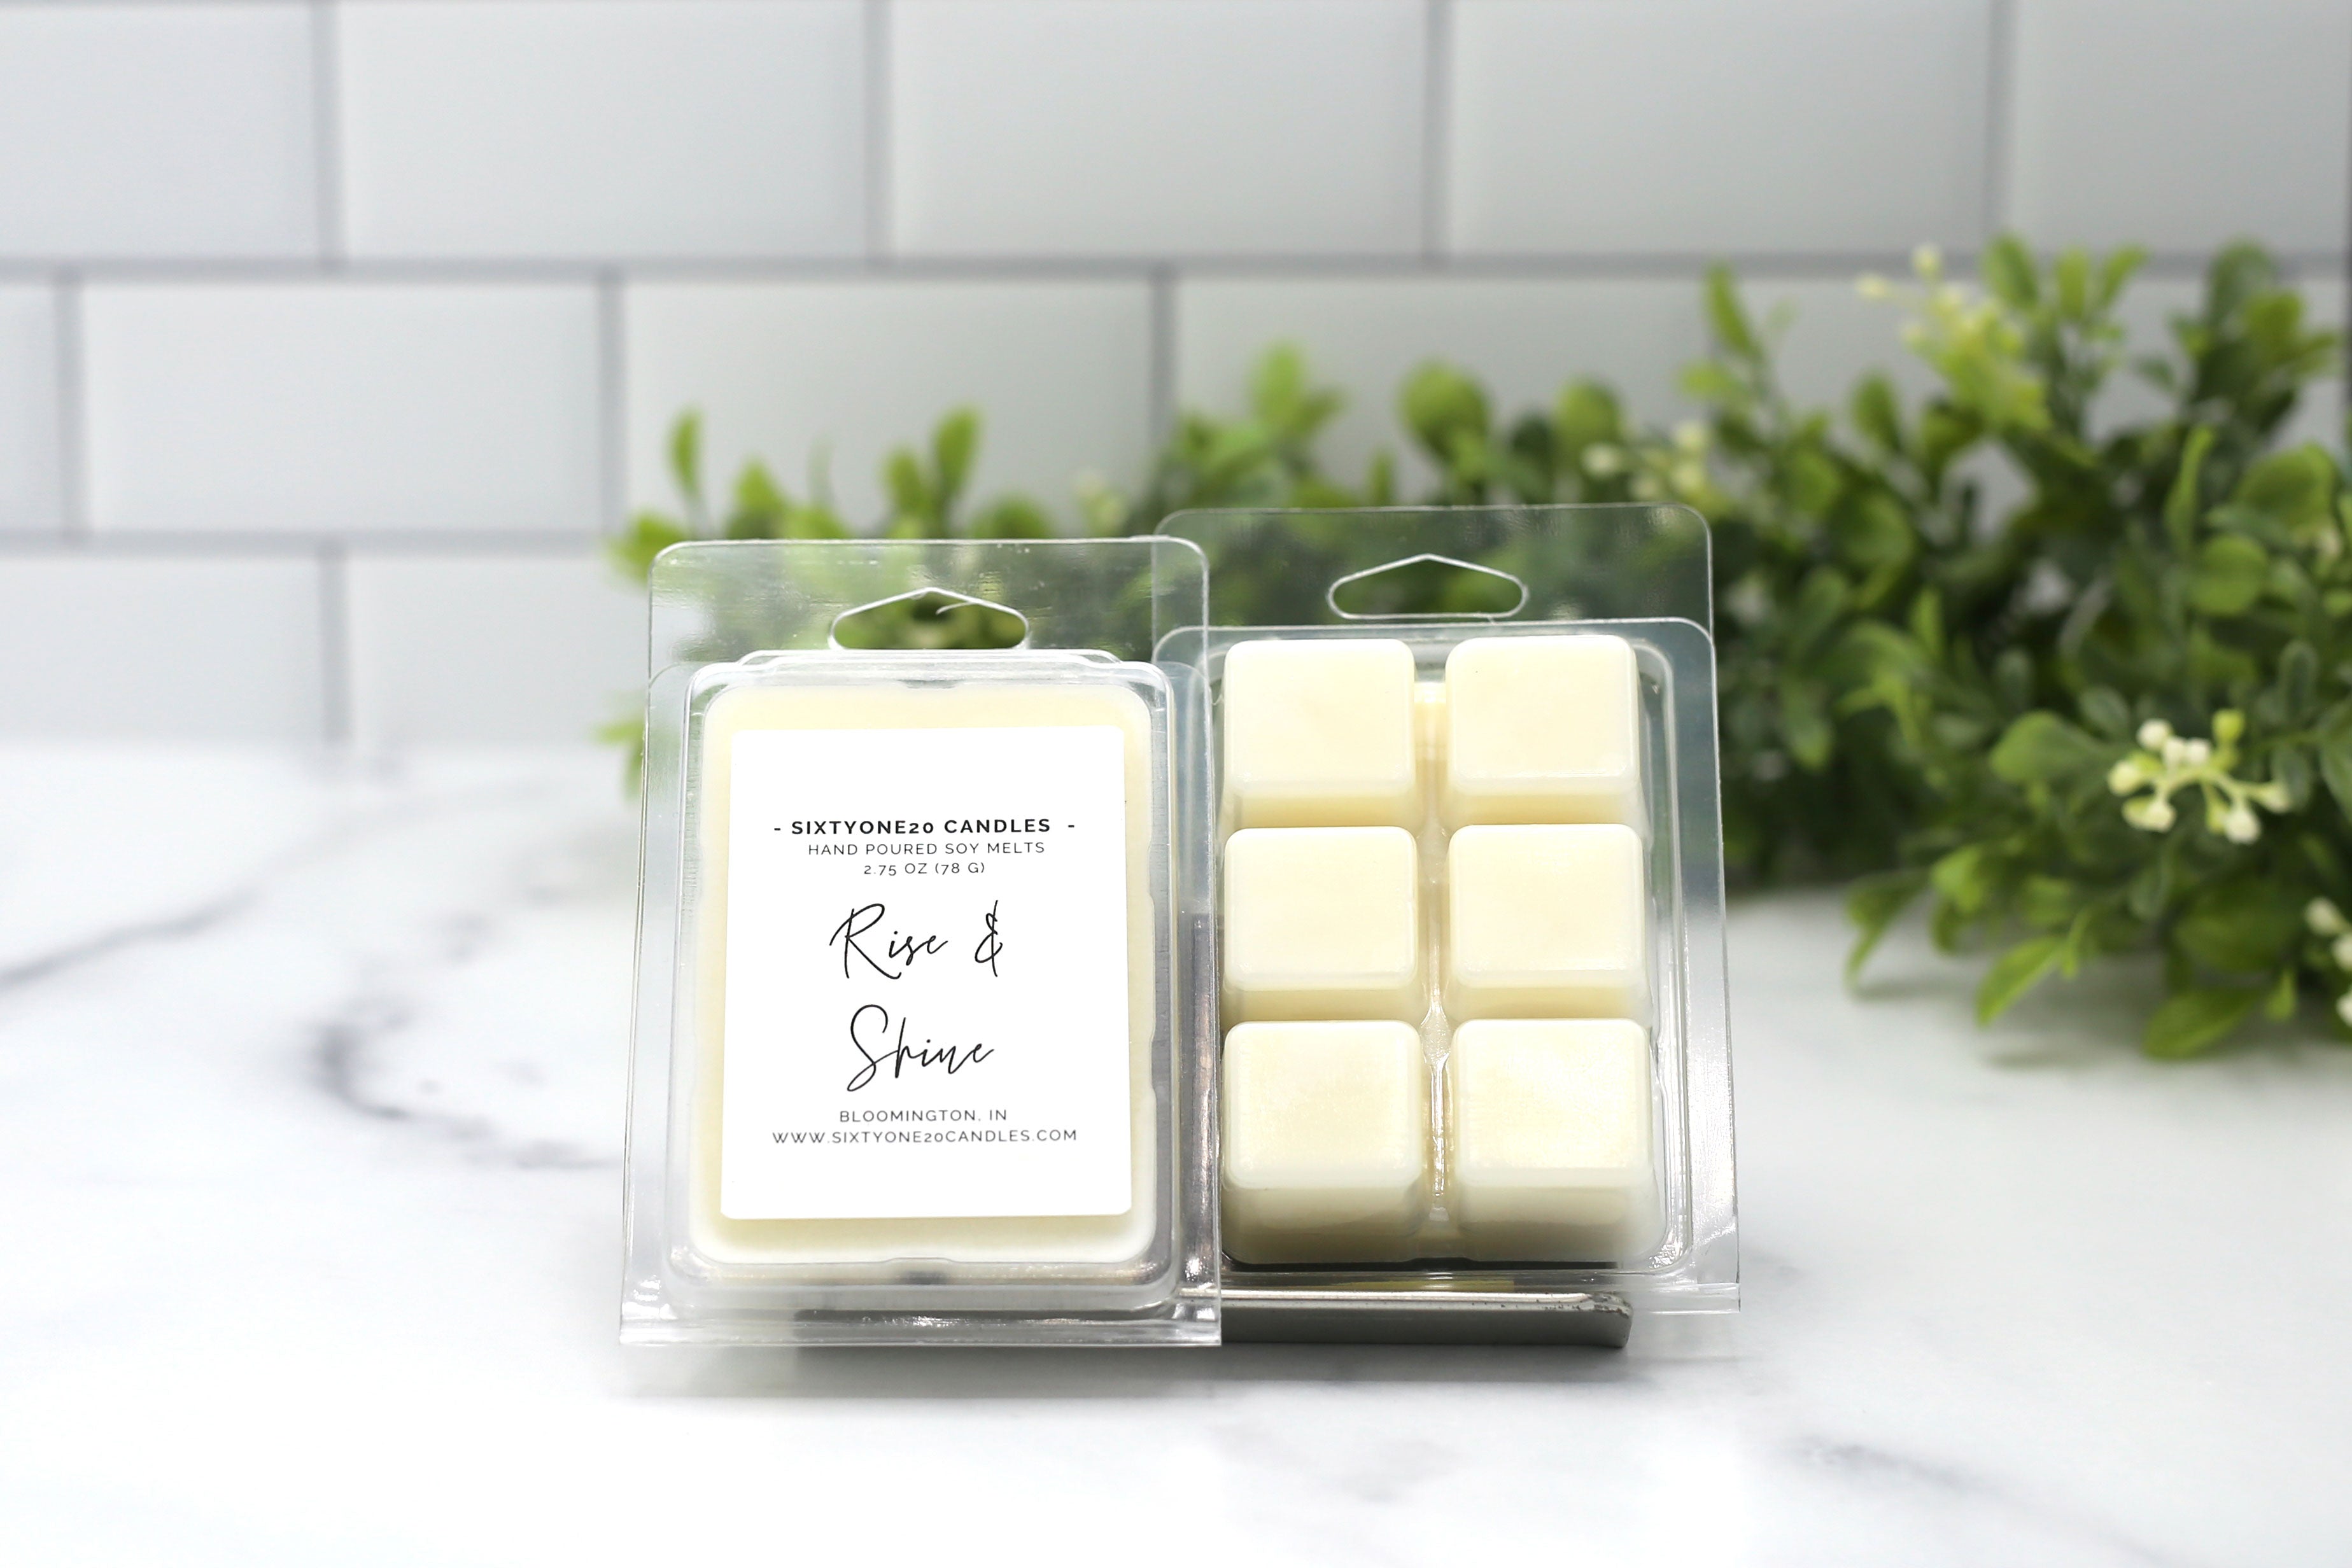 Soy Wax Melts – Risen Candle Co.